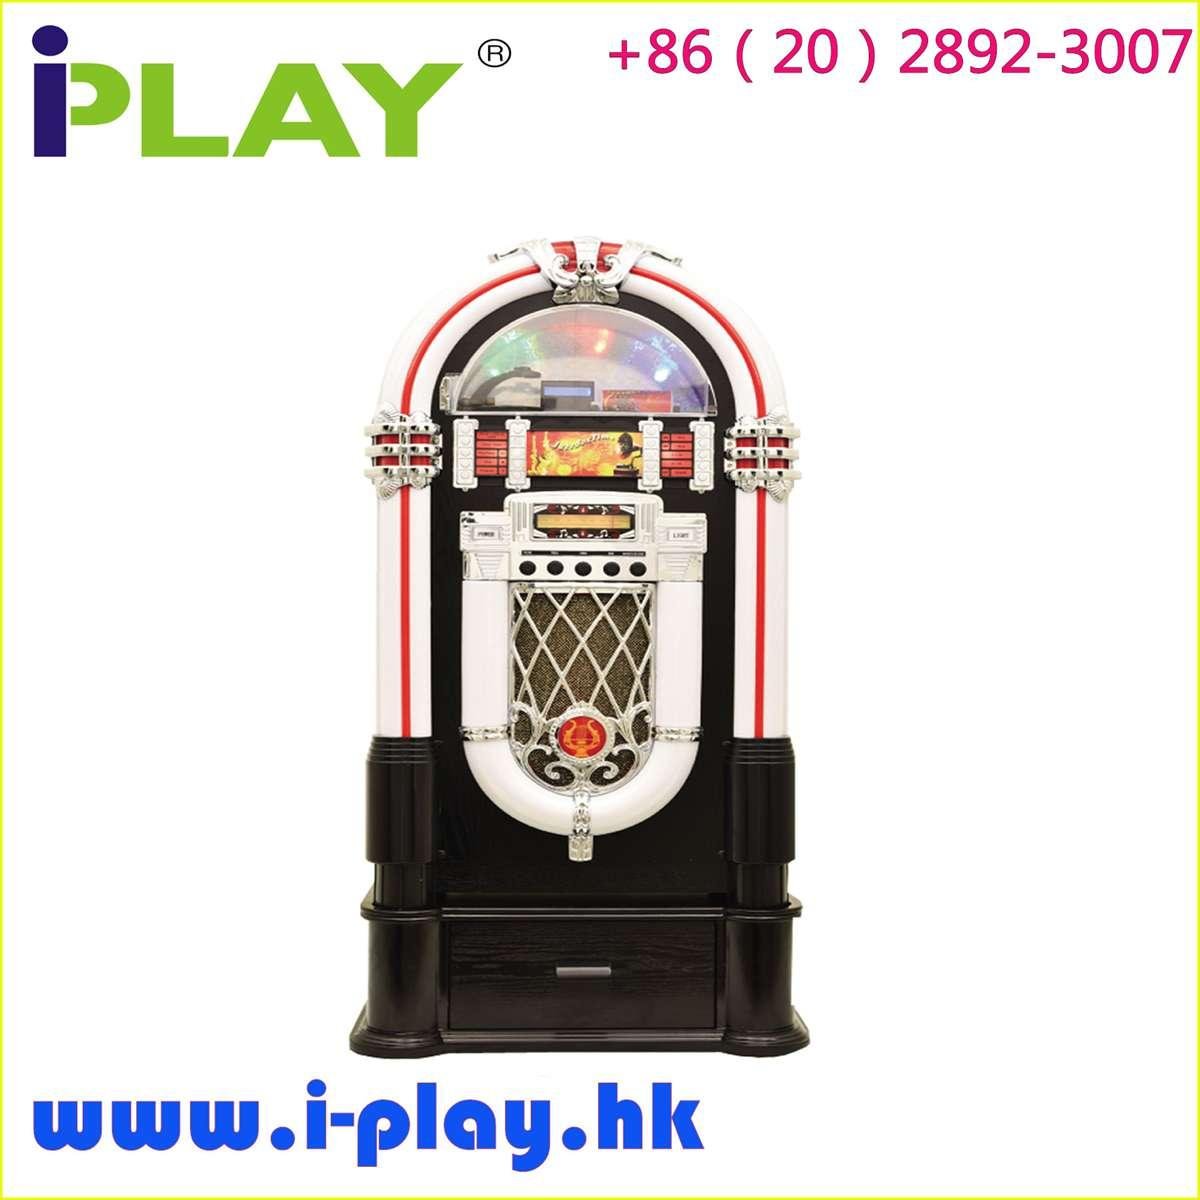 Jukebox Station With CD Player